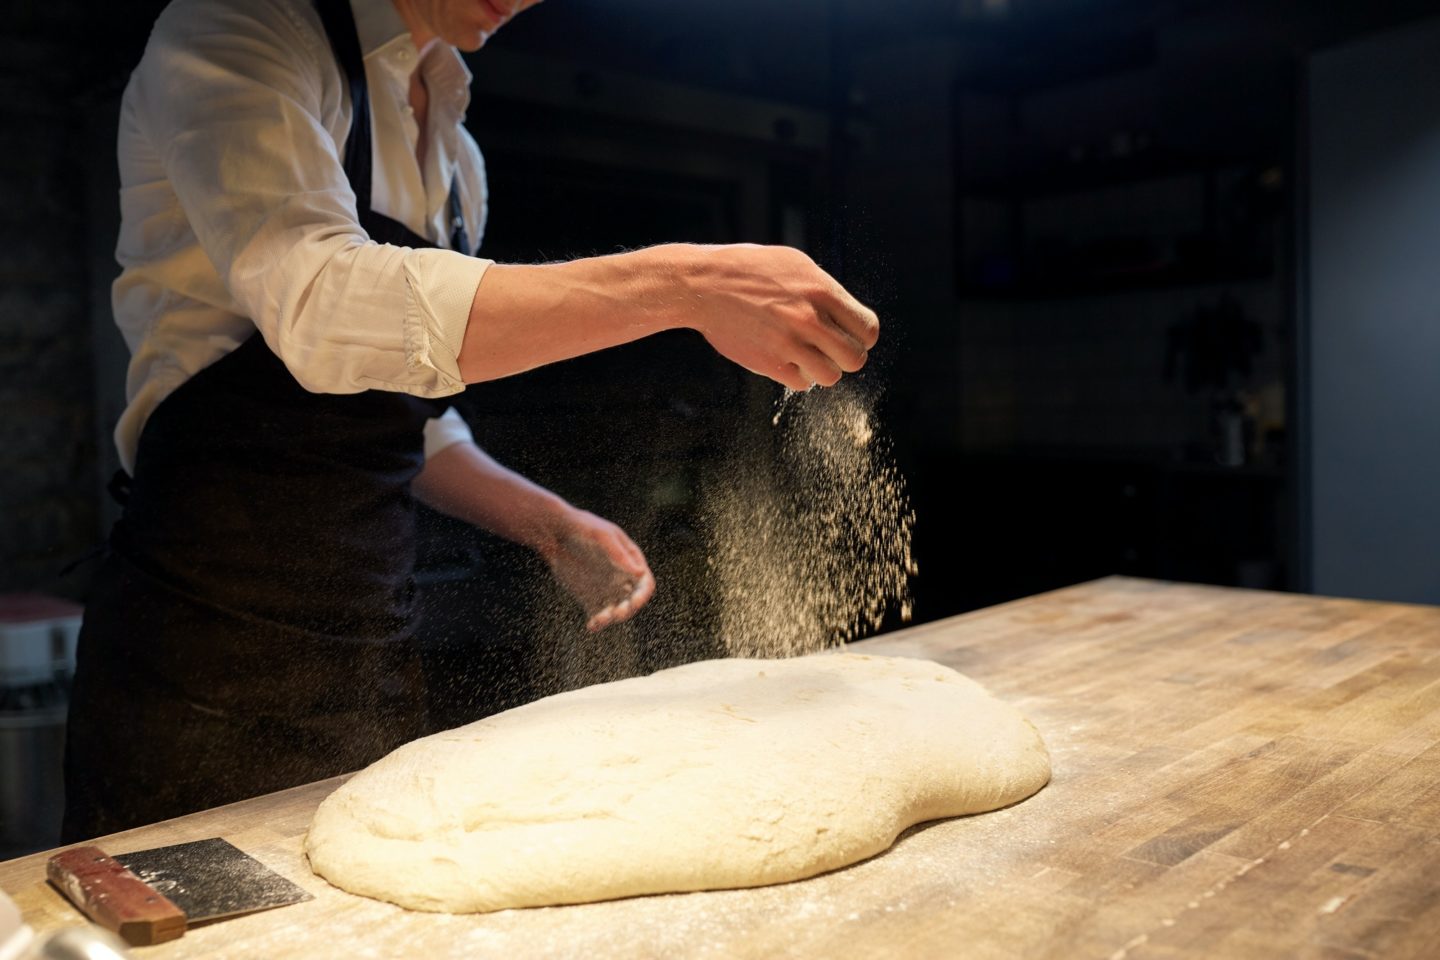 chef or baker making bread dough at bakery